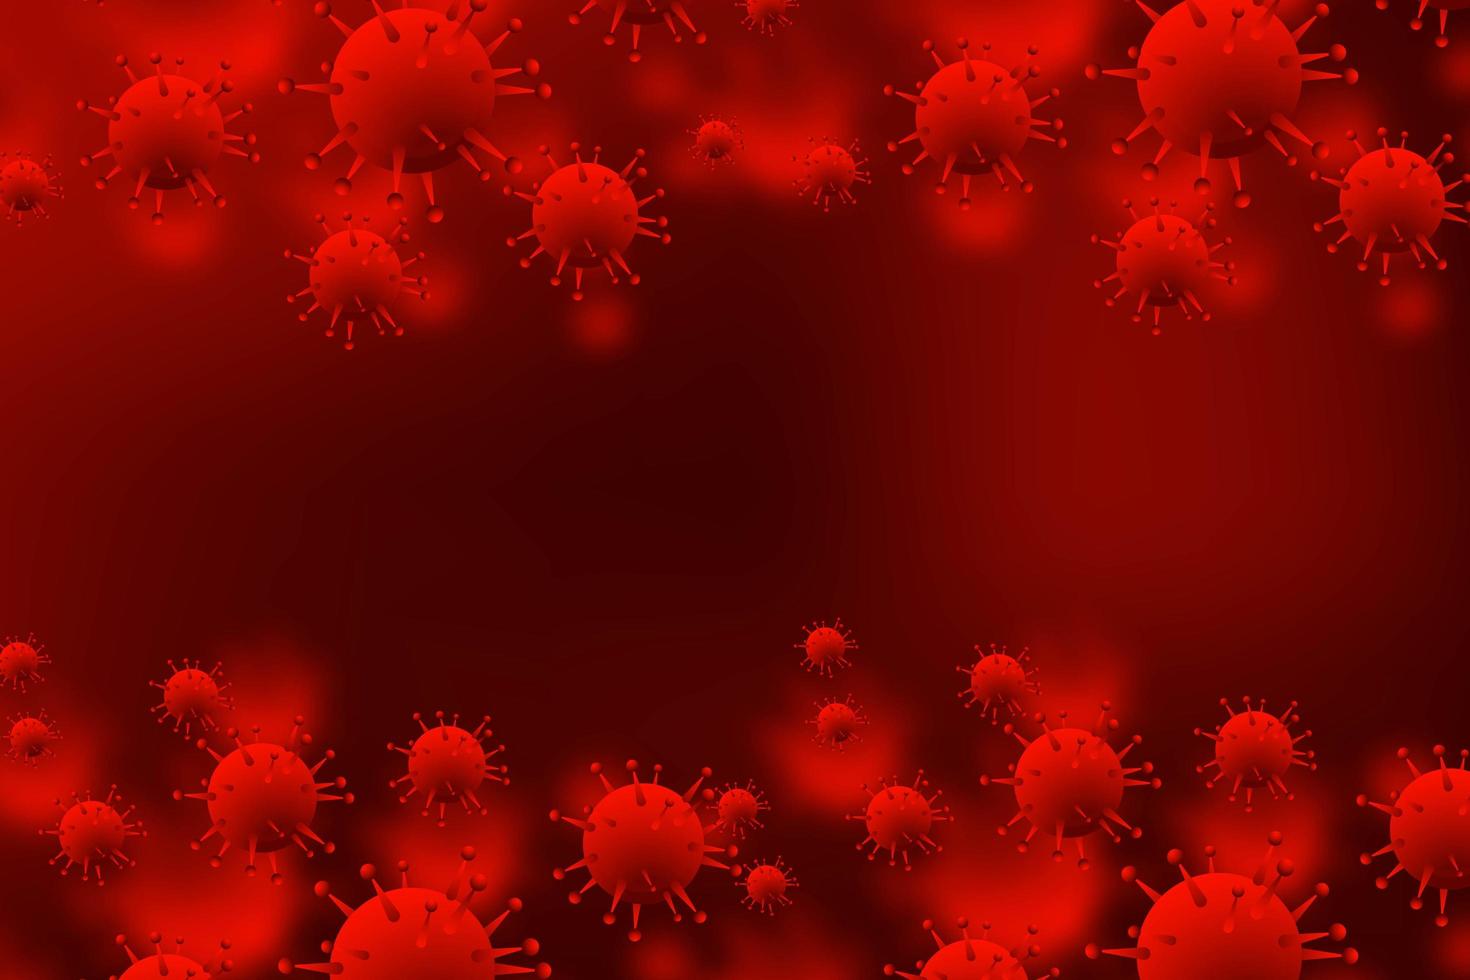 COVID-19 Microbe Cells in Blood Background vector